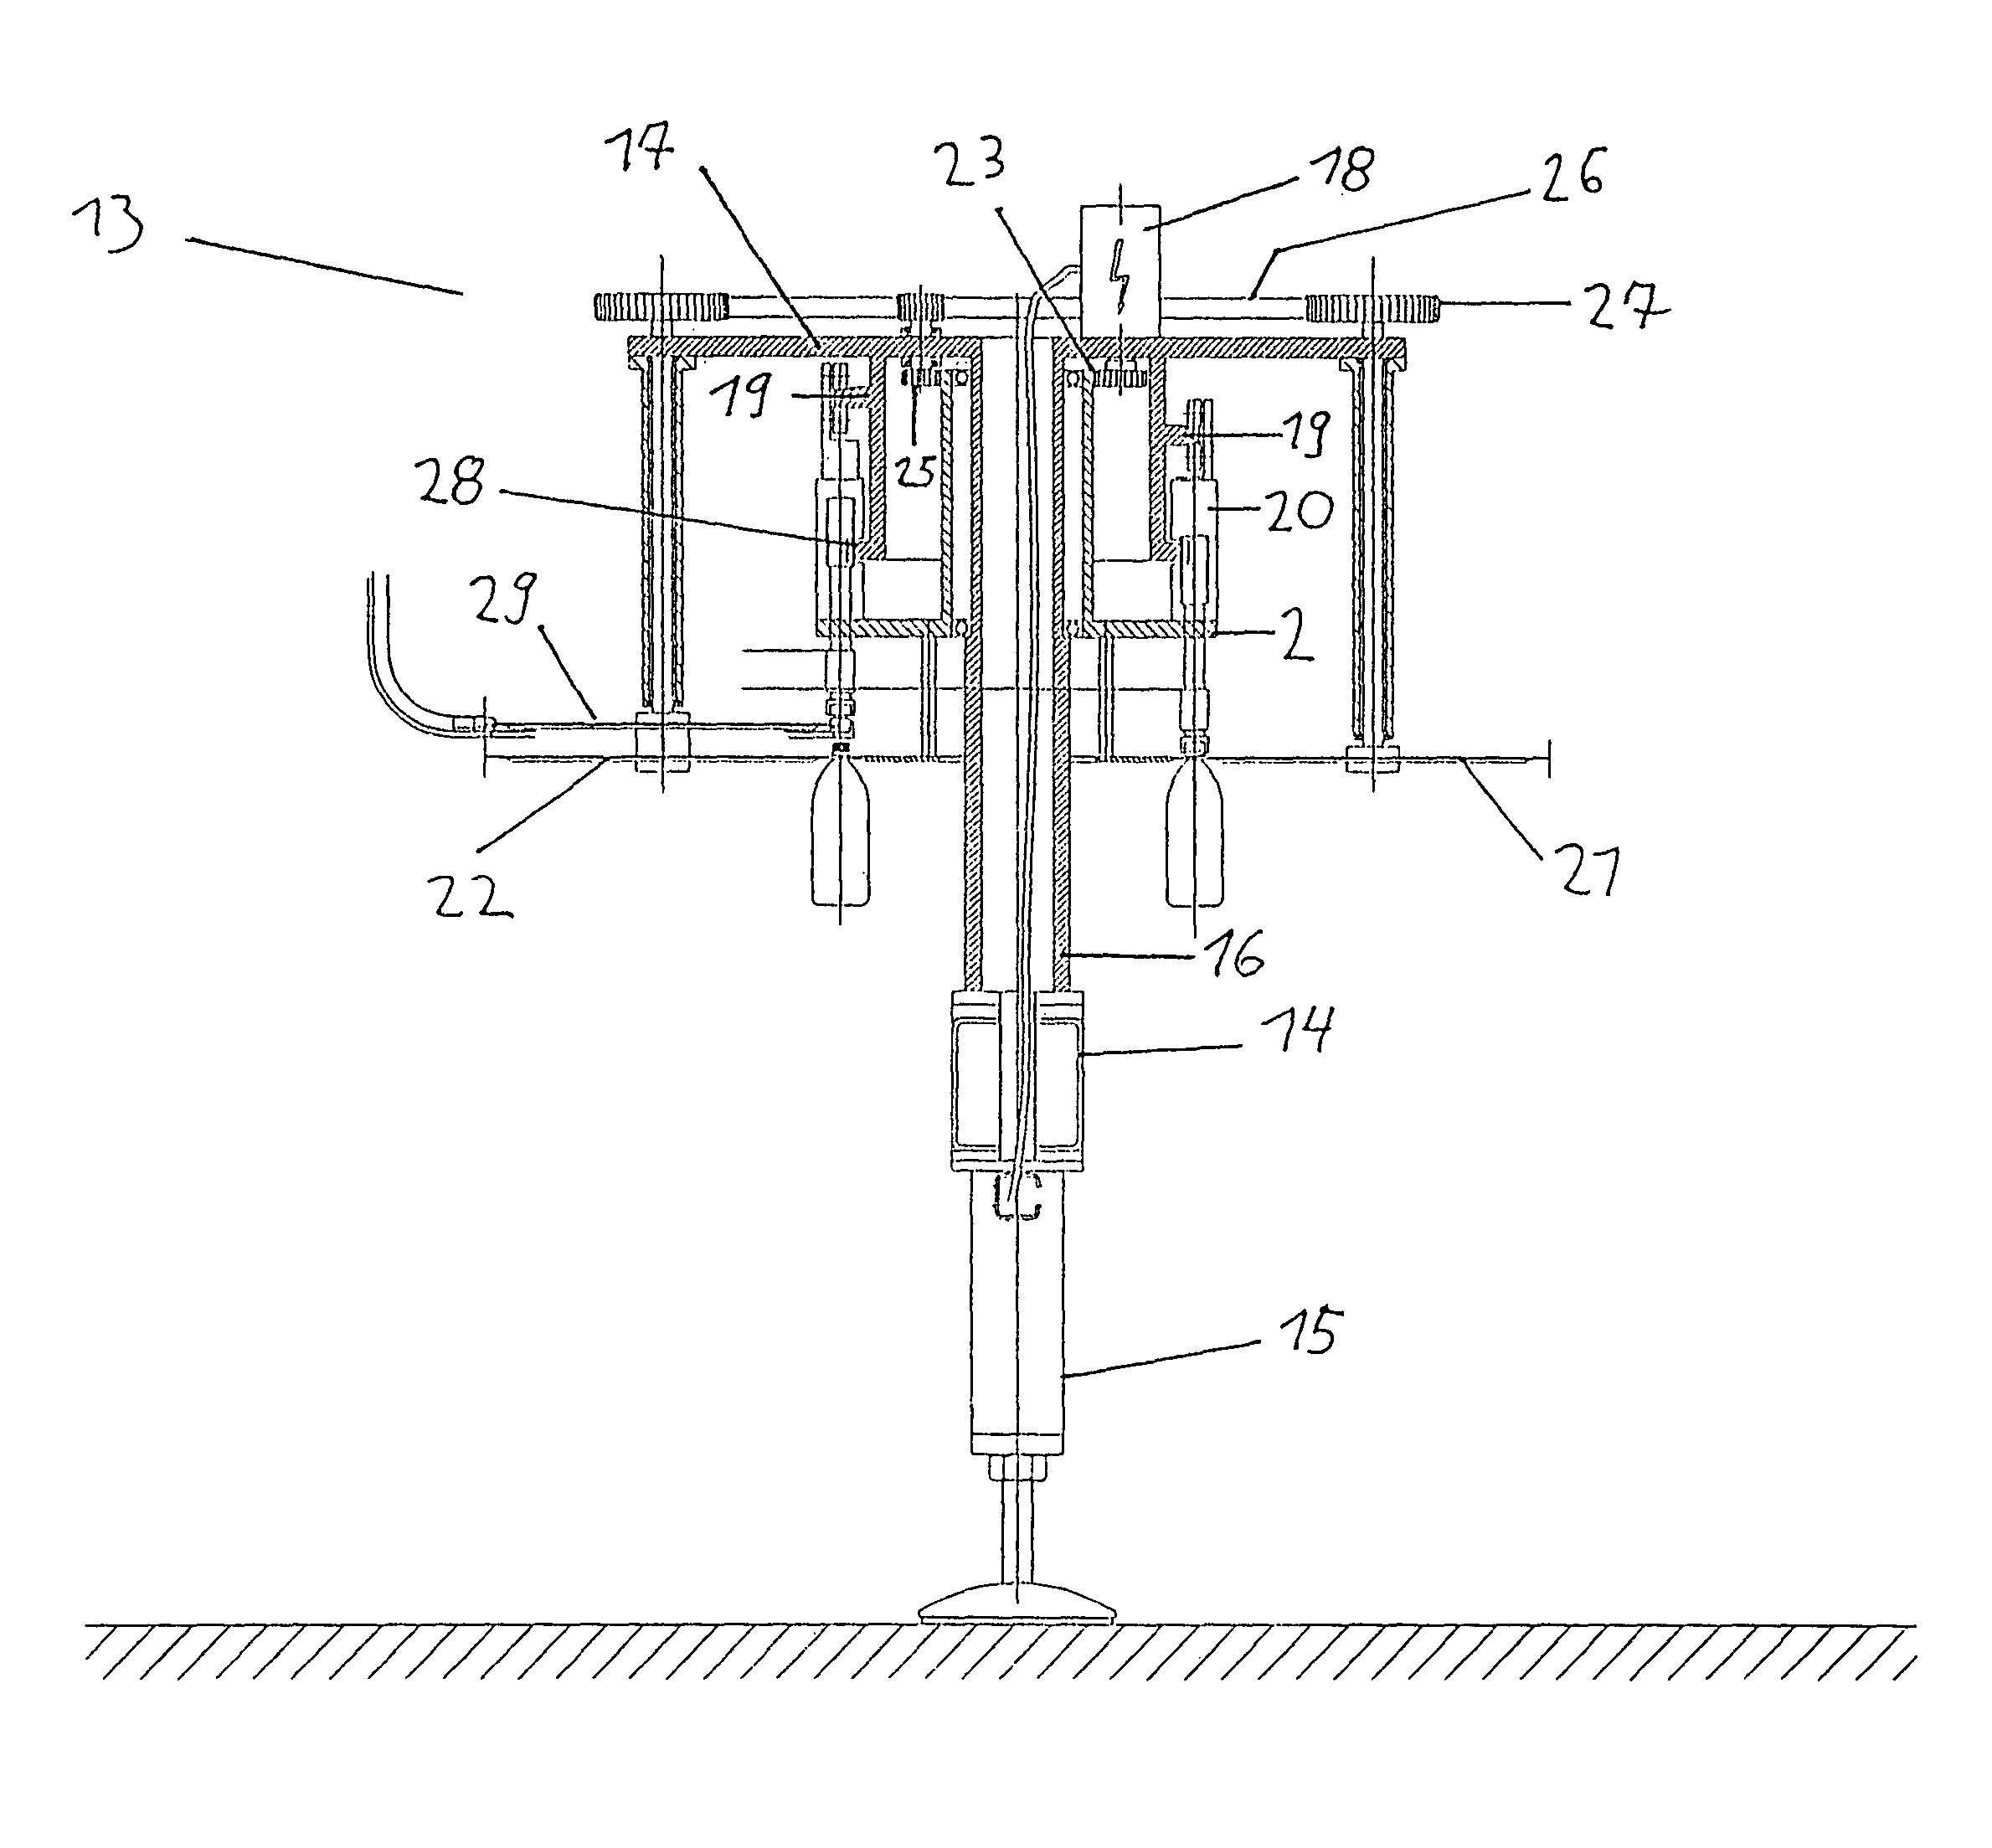 Container filling plant, such as a beverage bottling plant, for filling containers with a liquid beverage and for closing filled containers